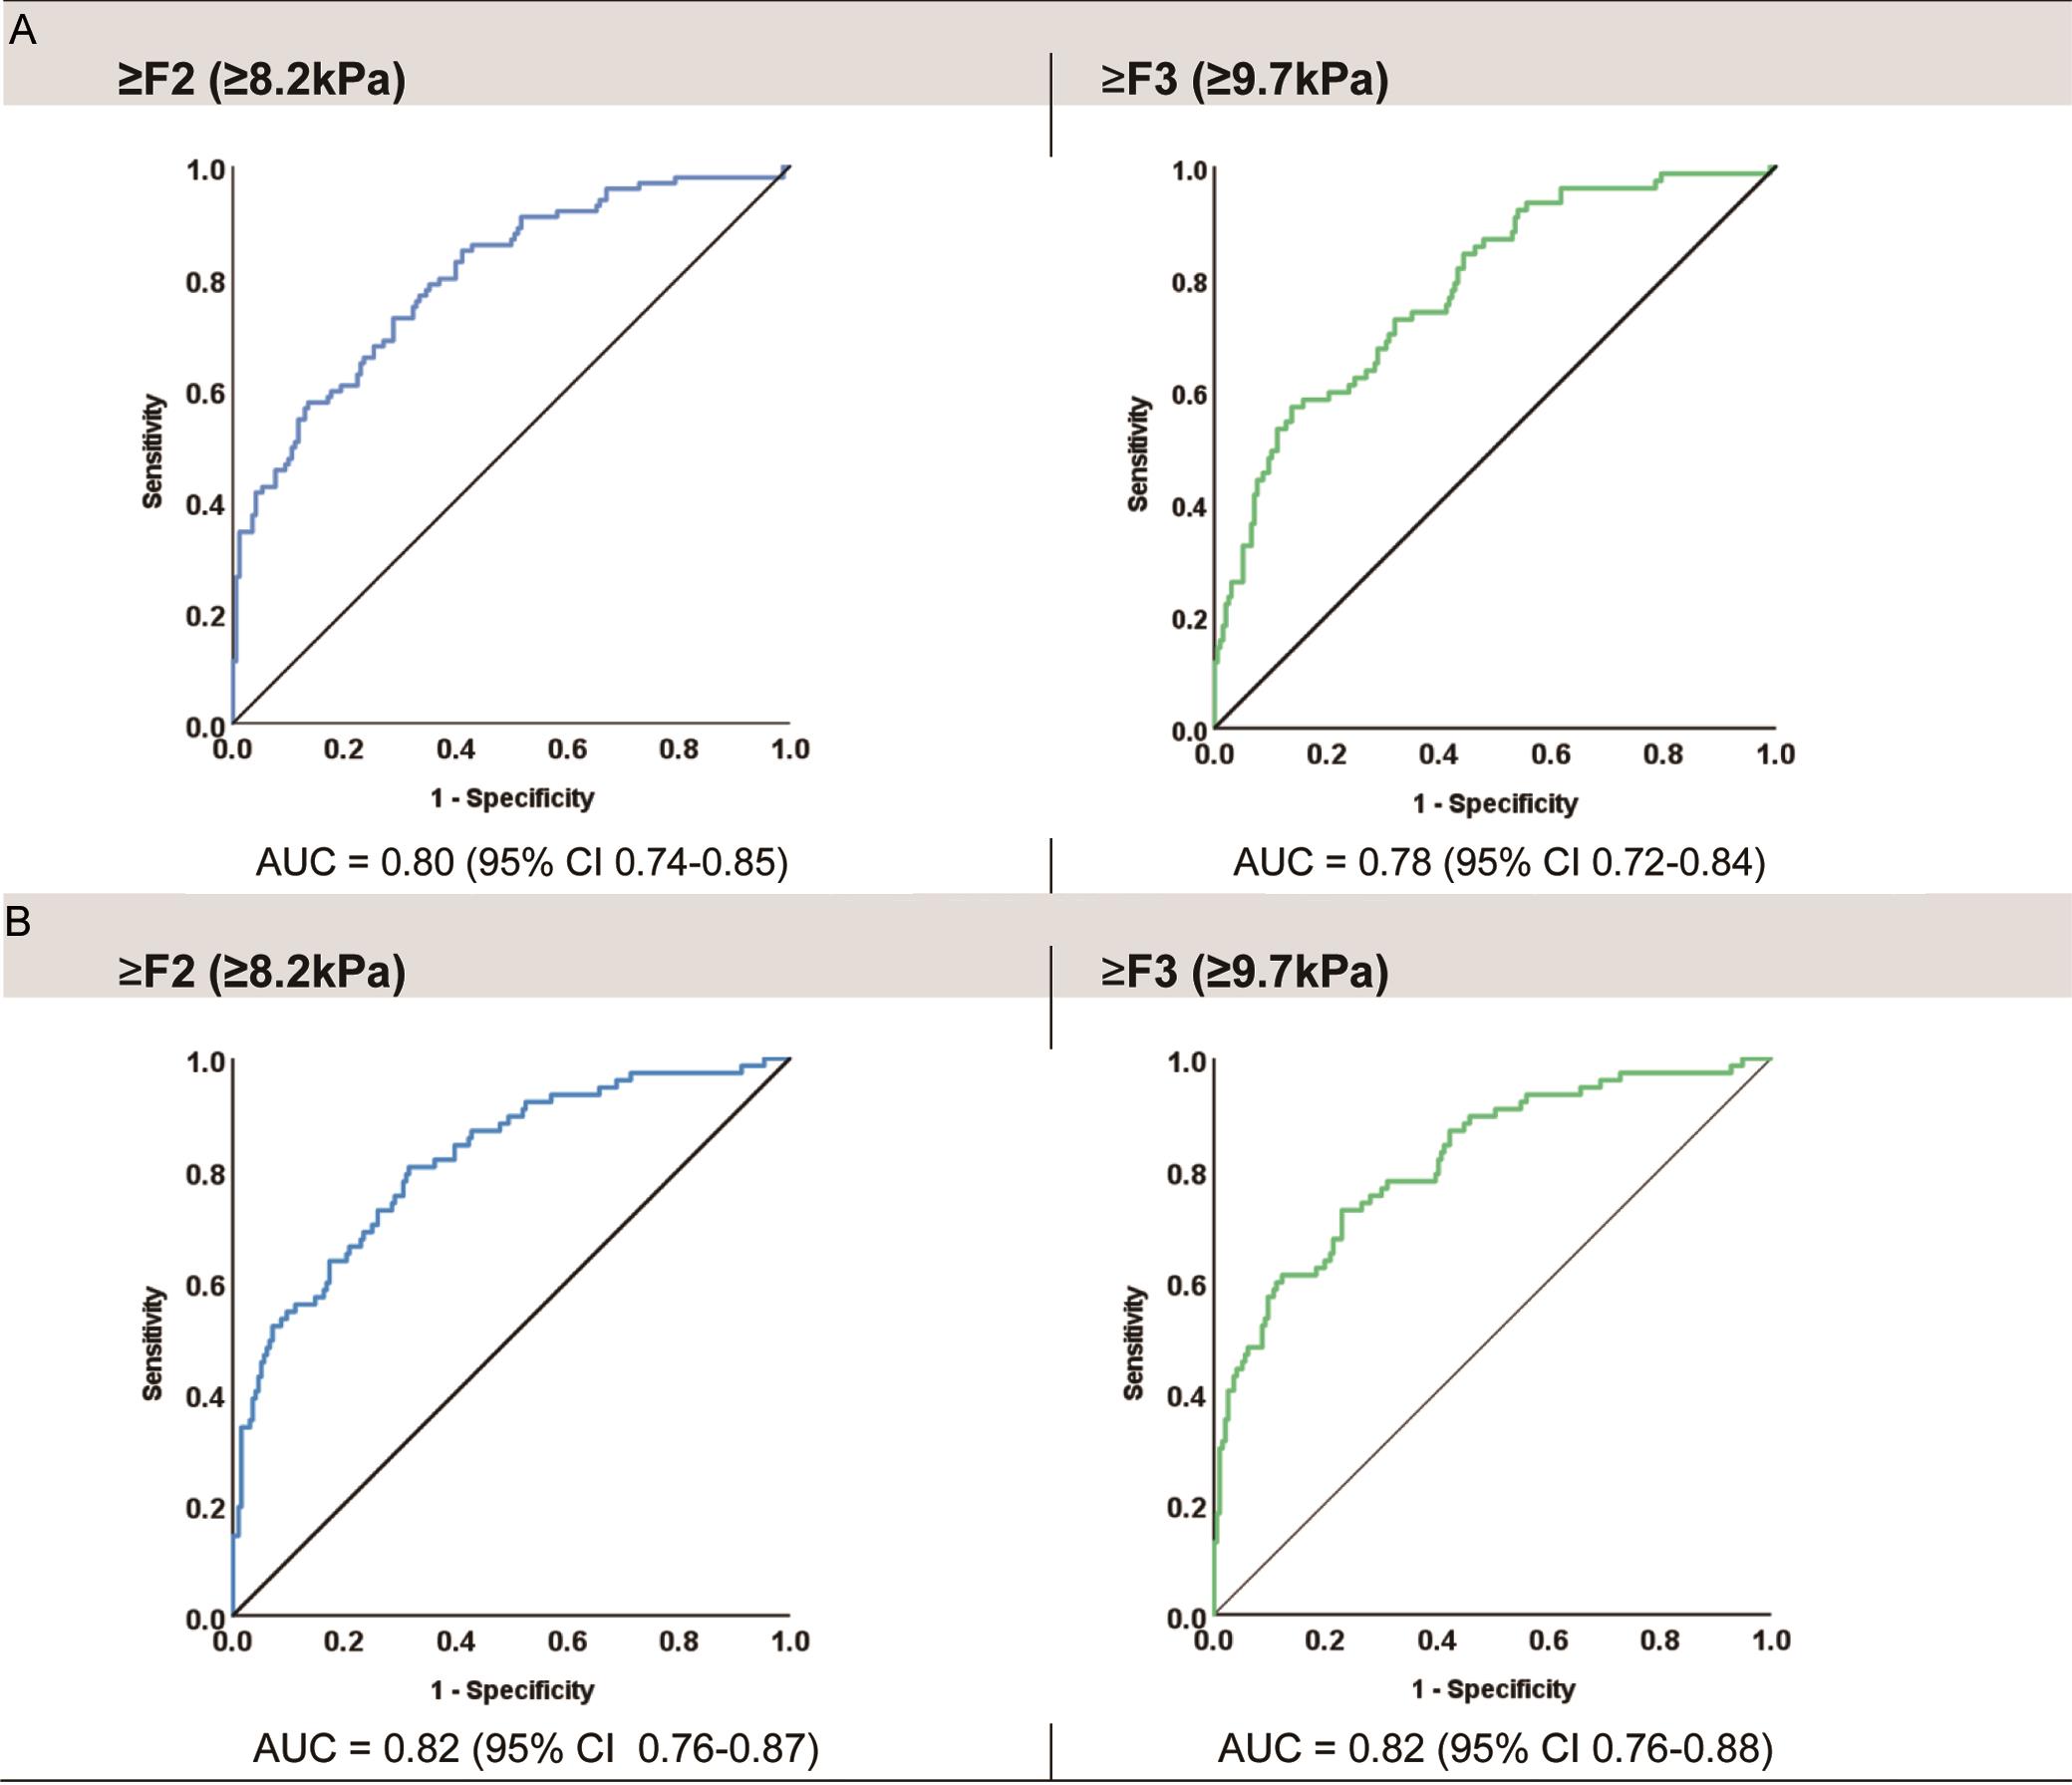 Area under the curve (AUC) receiver operating characteristics (ROC) for the prediction of significant (≥F2/≥8.2 kPa) and advanced fibrosis (≥F3/≥9.7 kPa) using (A) ALT, BMI, and HbA1c and (B) ALT, BMI, HbA1c, and ELF.